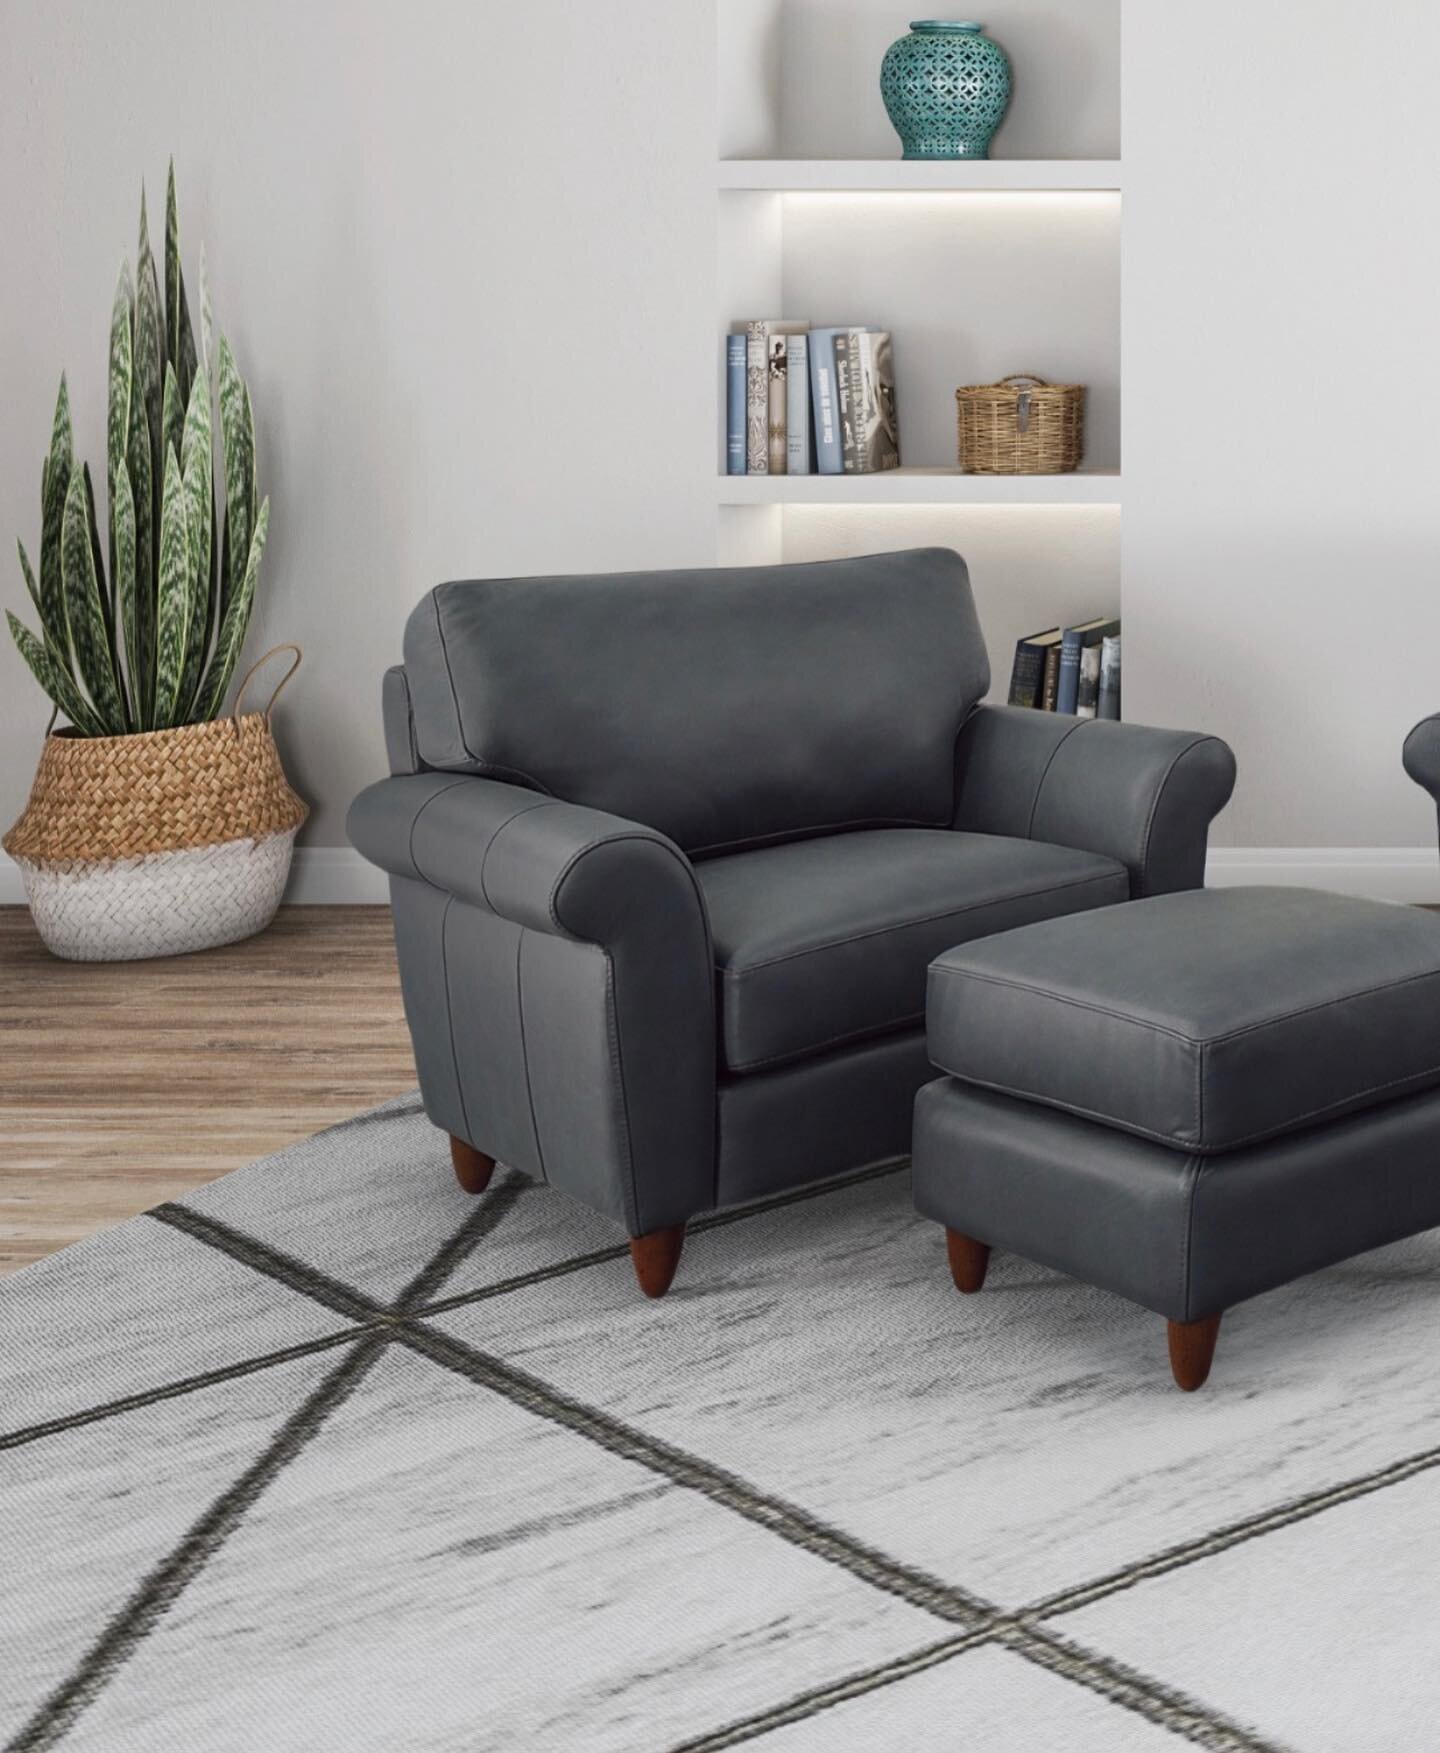 Want the luxury of leather, but don&rsquo;t want to overpower the space? Check out @omnialeather and their beautiful collections. 

#denver #colorado #decor #decorinspo #decorinspiration #furnituredesign #furnituredesigner #showroom #design #designsh